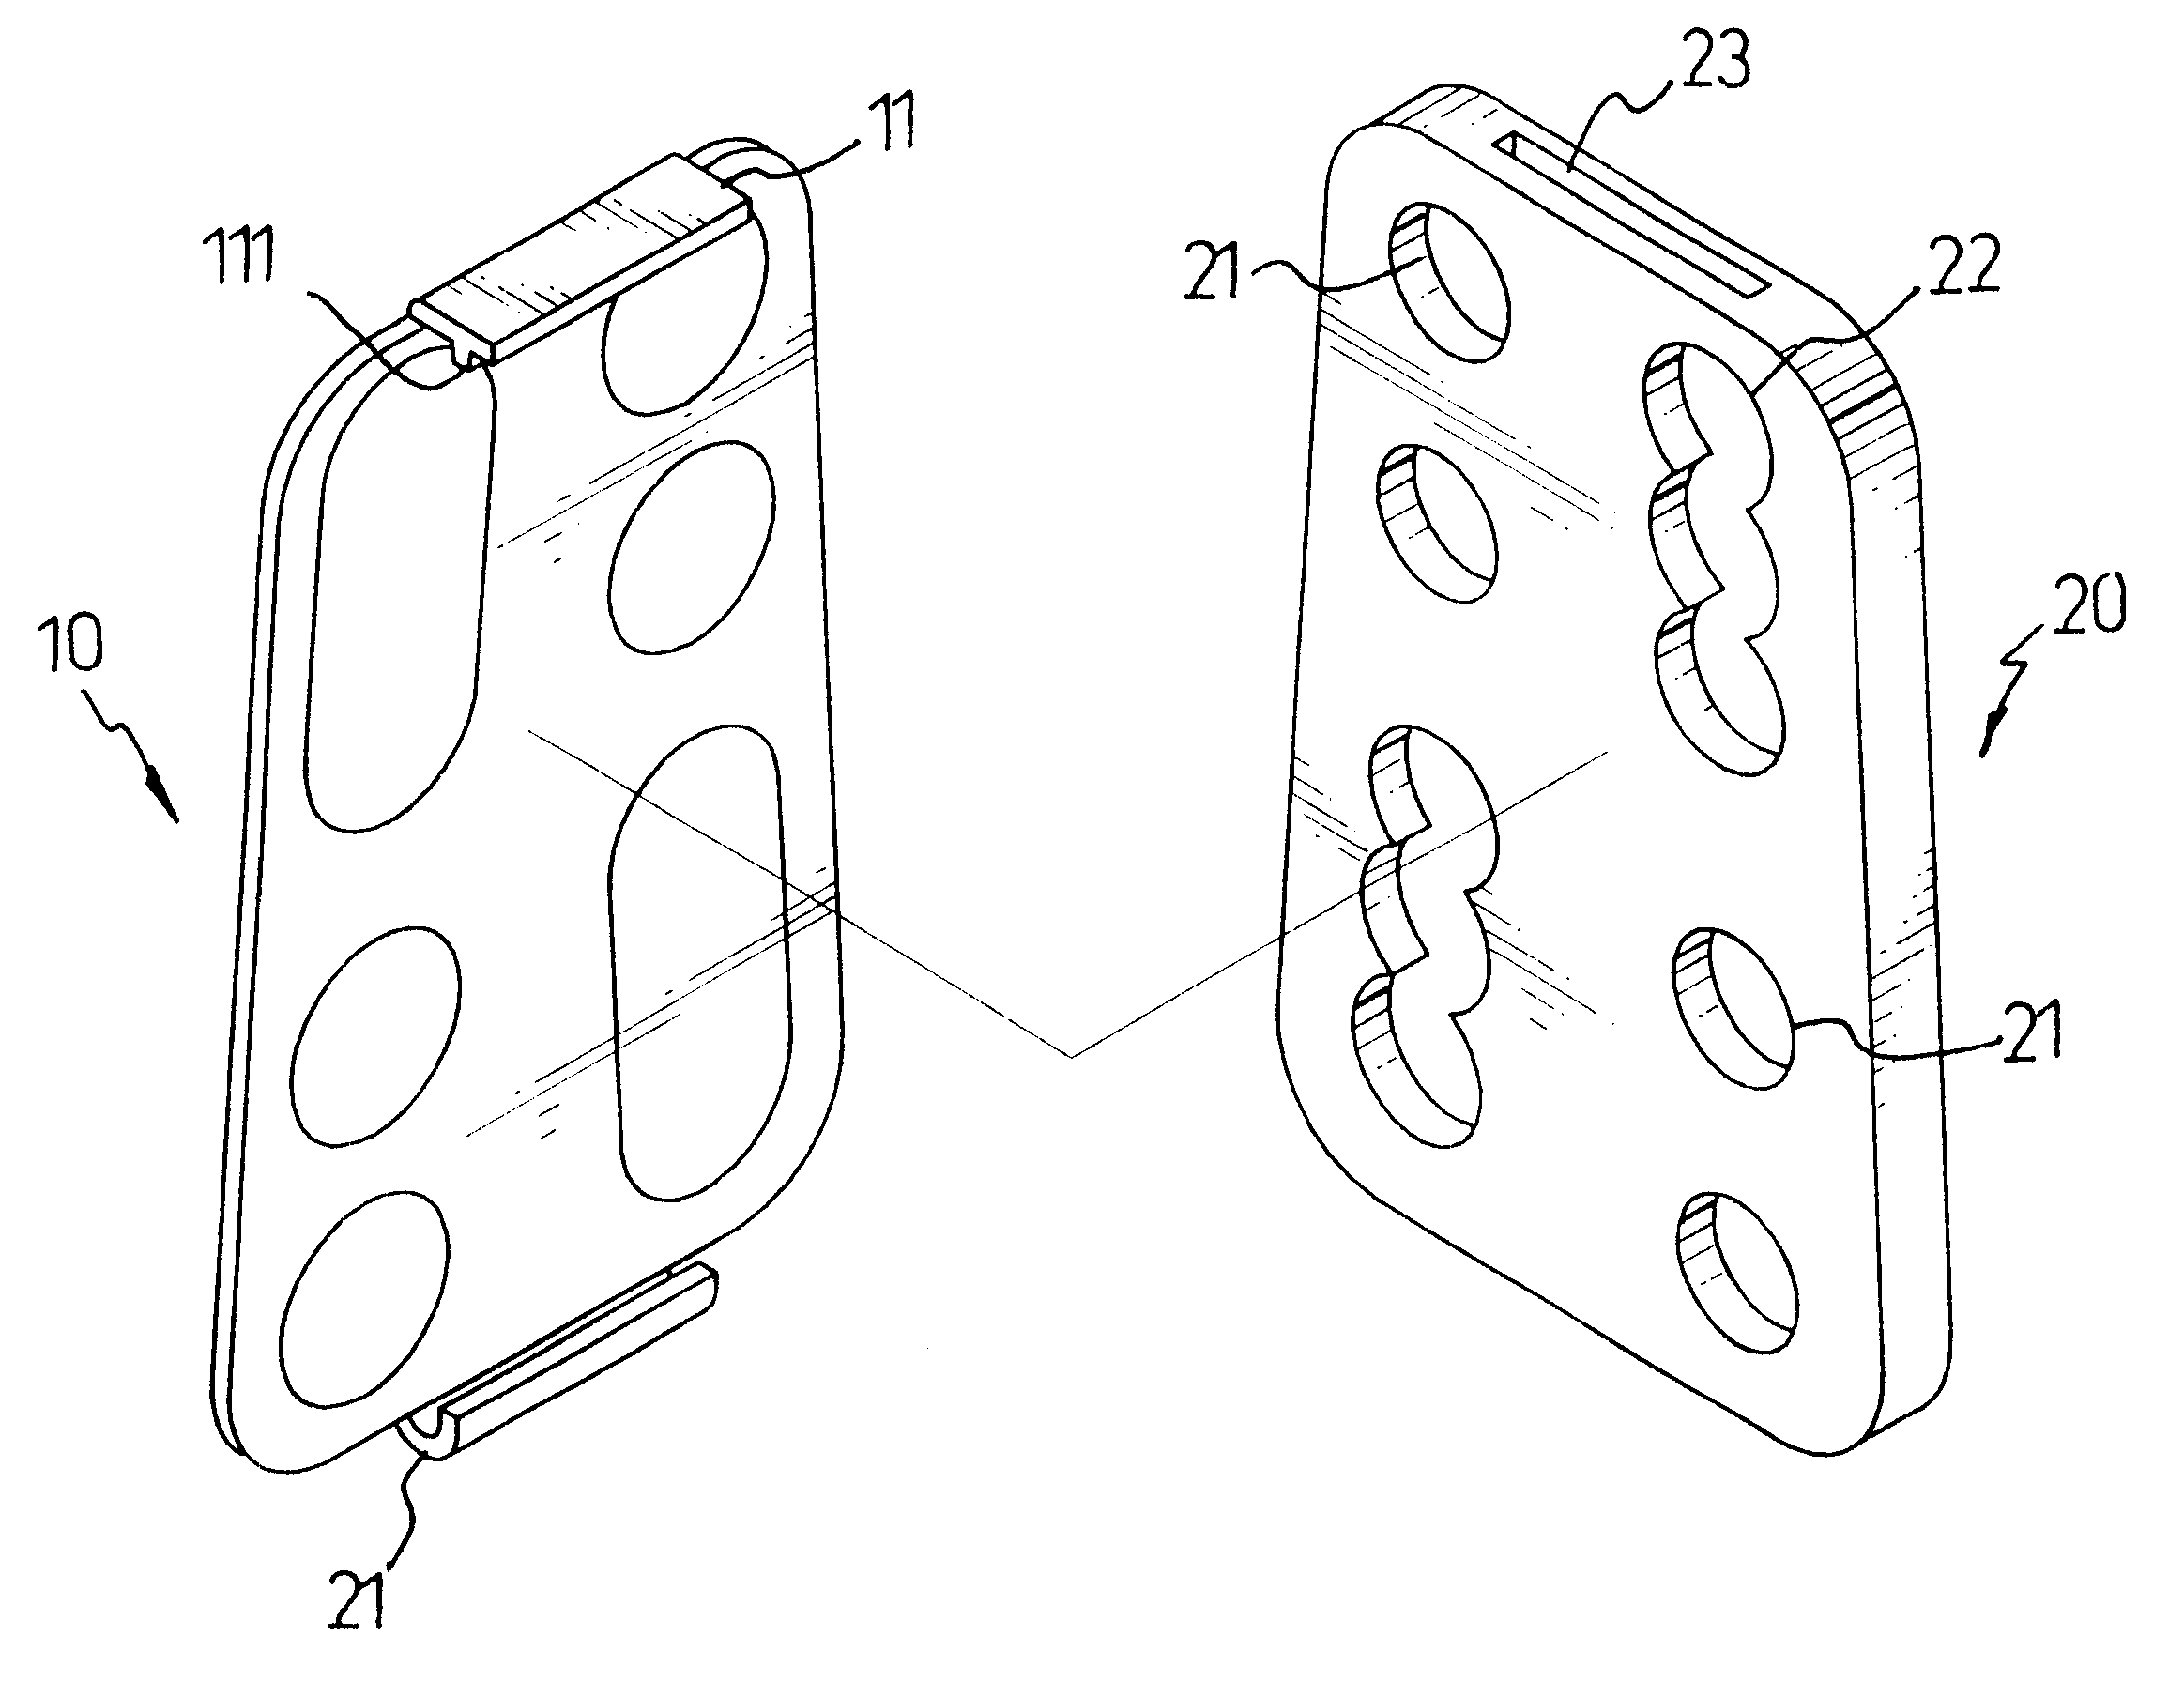 Bone reinforcement plate for use on the spine